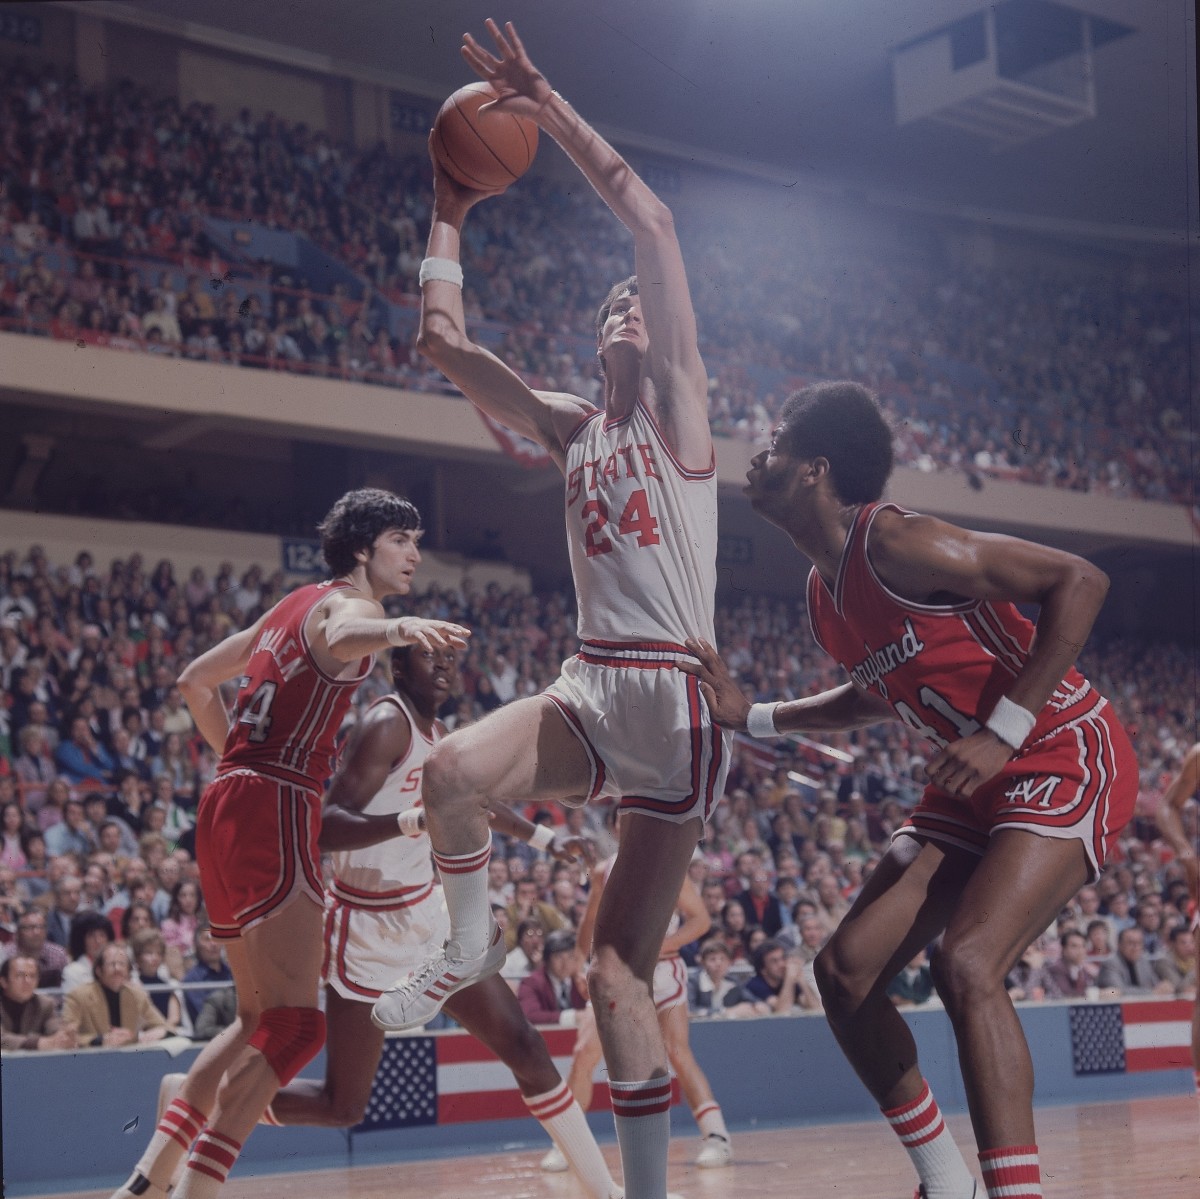 NC State's Tommy Burleson goes to the basket against Maryland in the 1974 ACC tournament final.